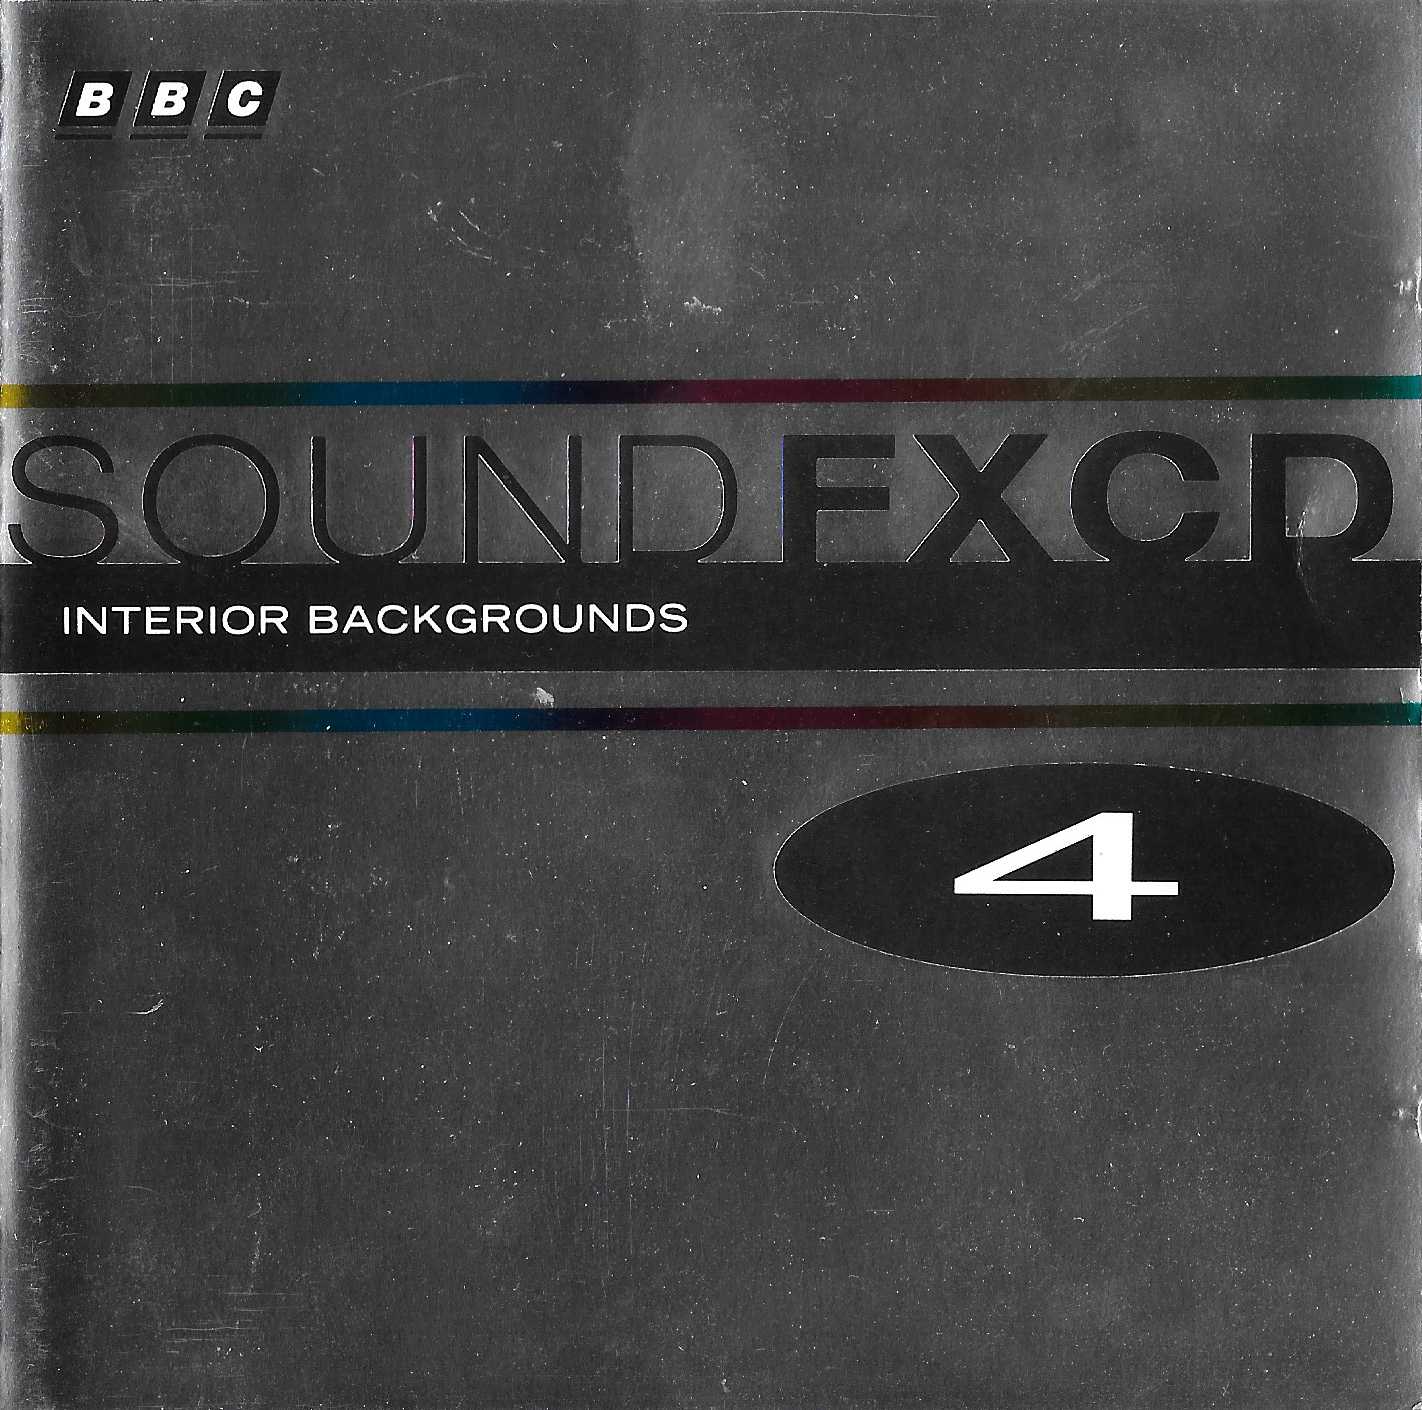 Front cover of BBCCD SFX004